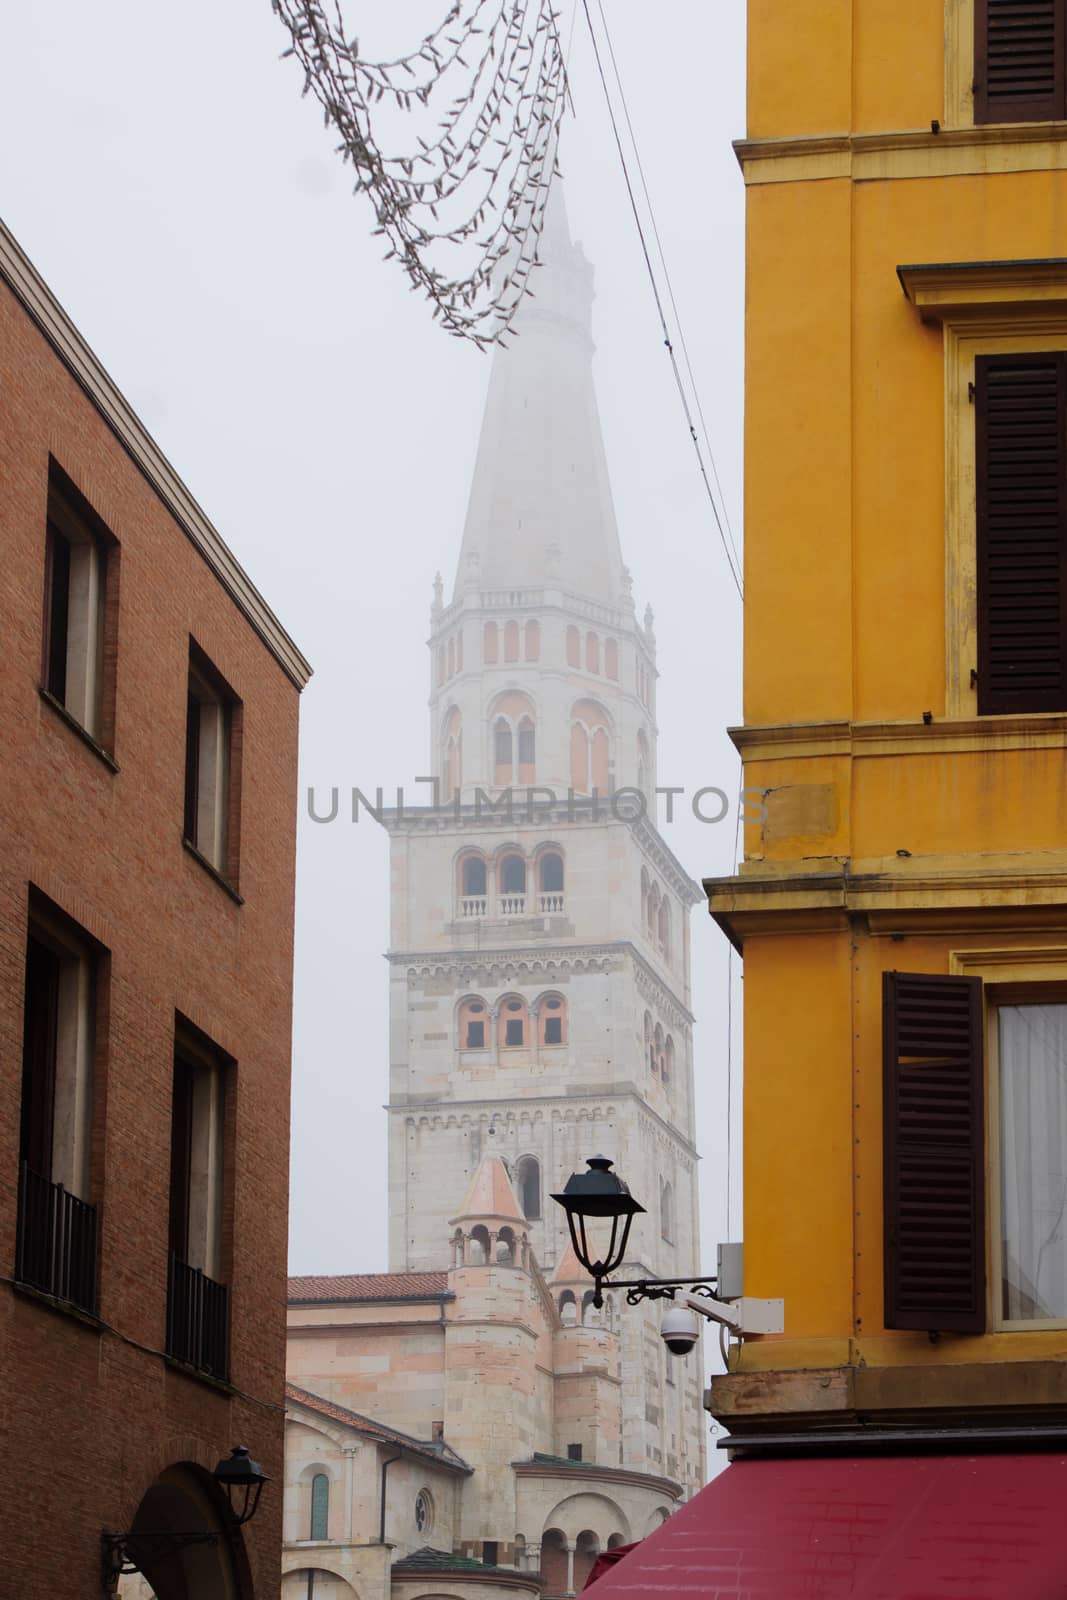 The Duomo tower and street scene in the historic center of Modena, Emilia-Romagna, Italy